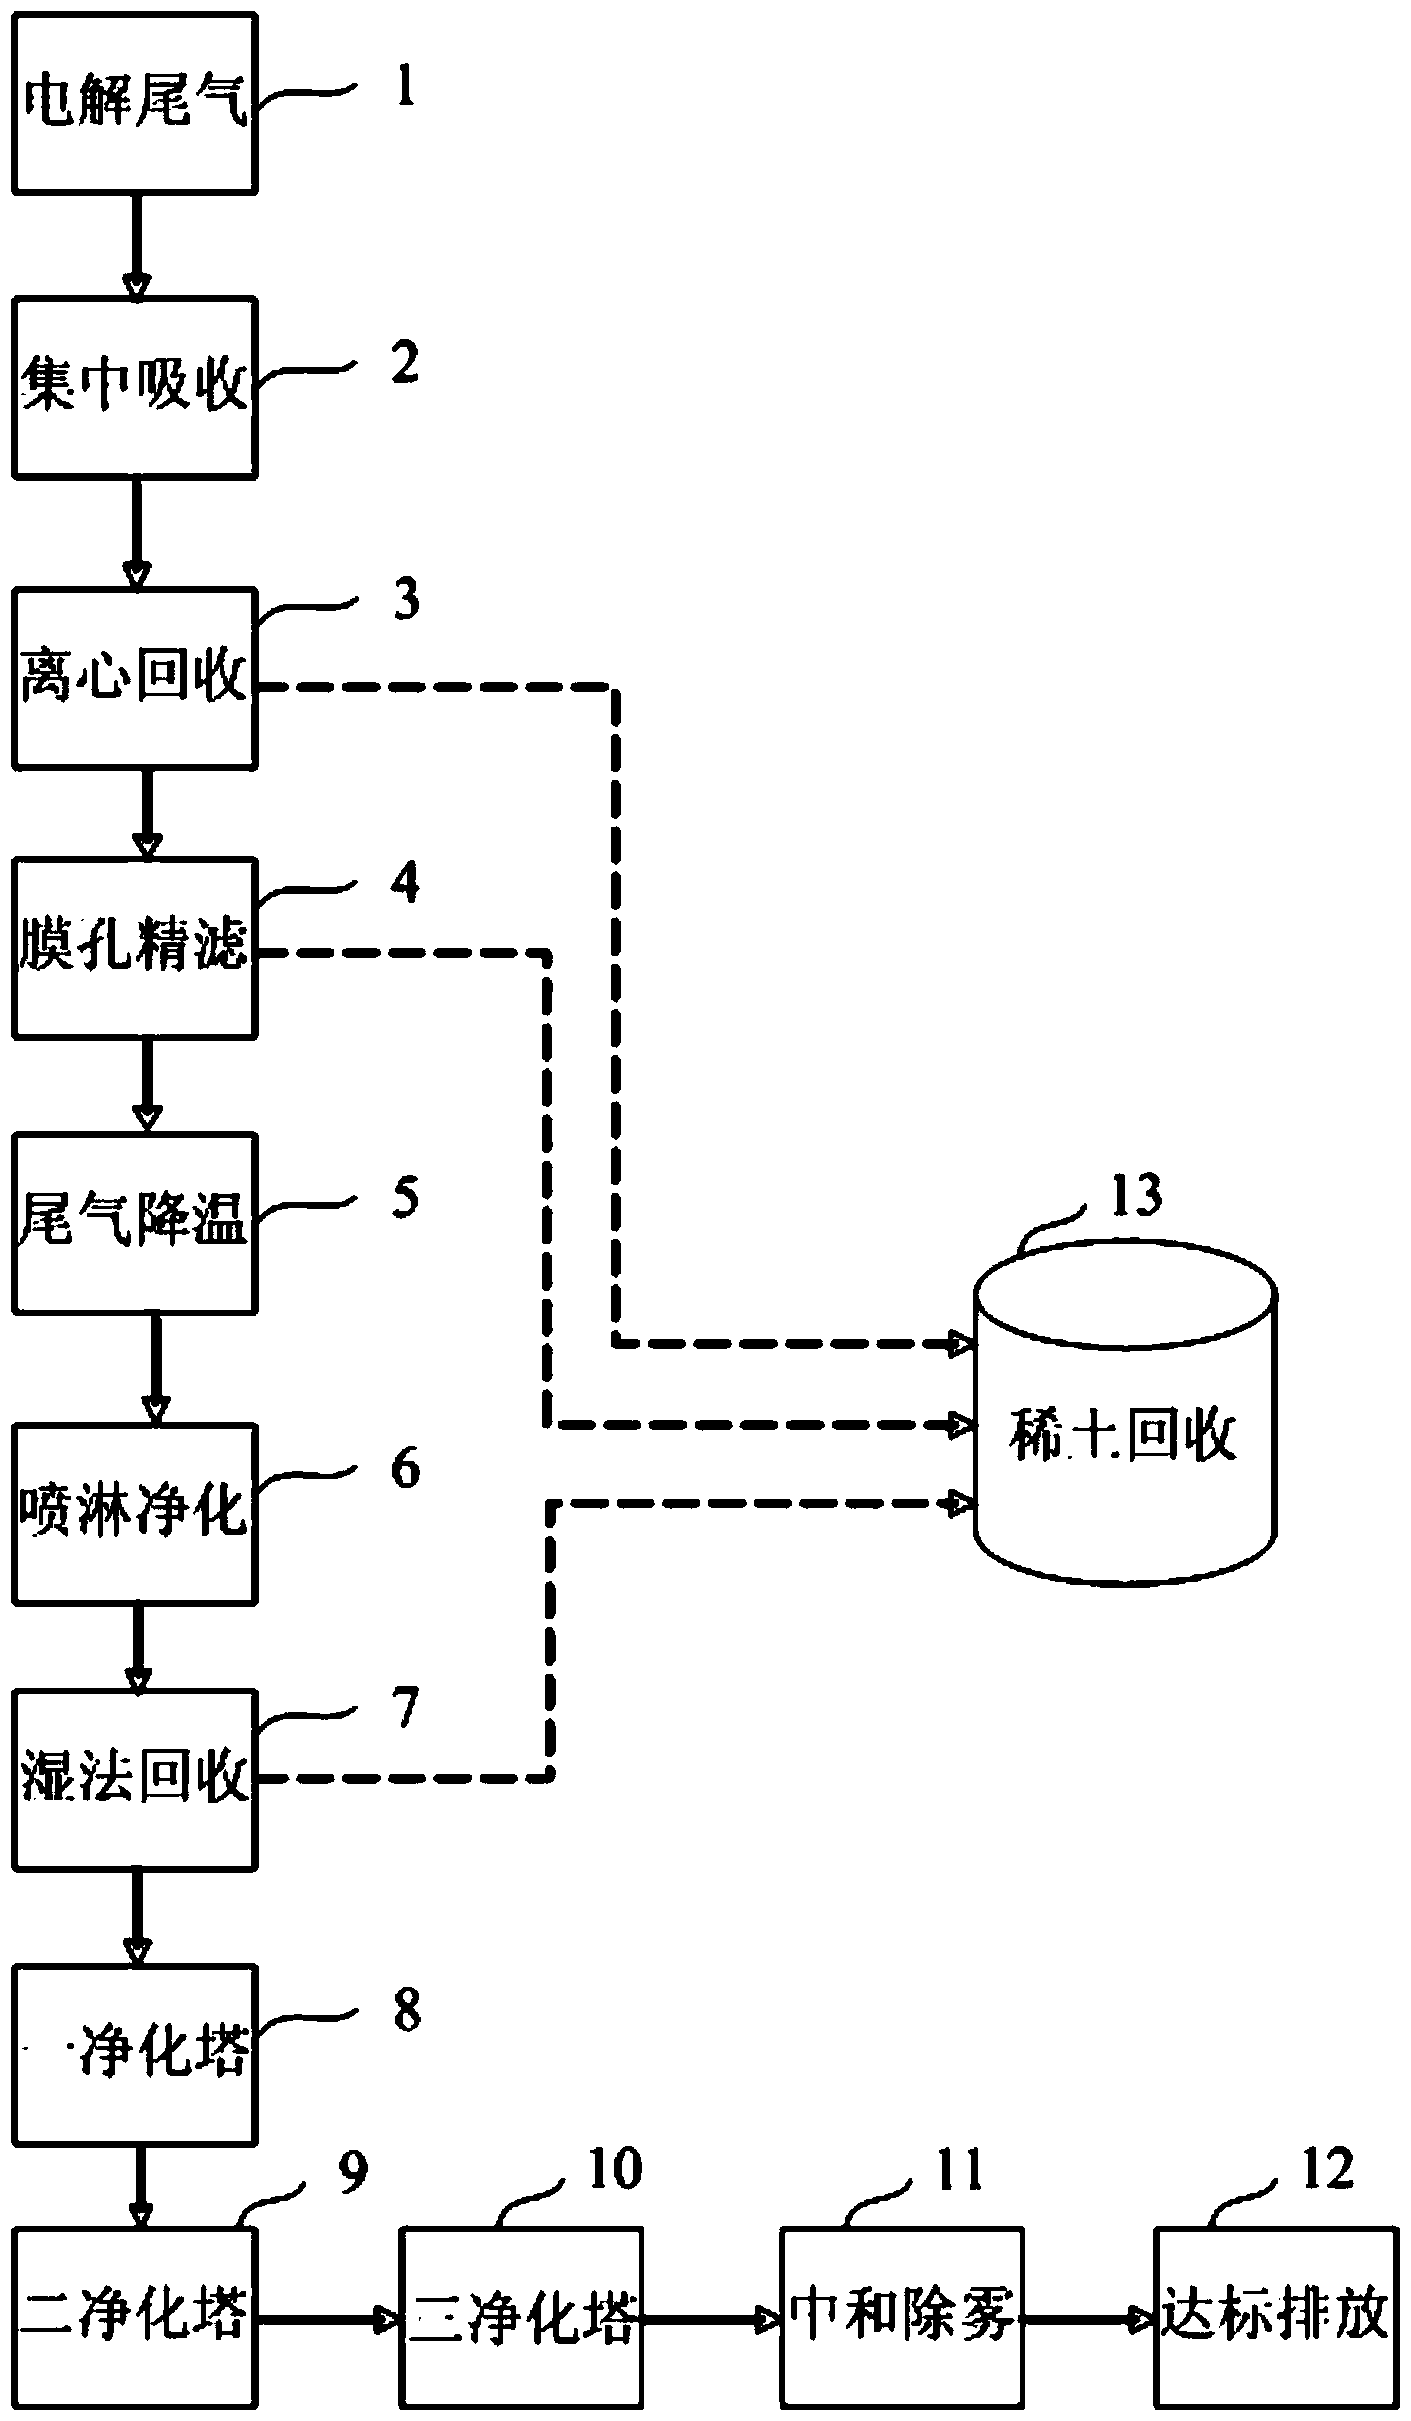 System for processing exhaust gas of rare earth electrolysis process